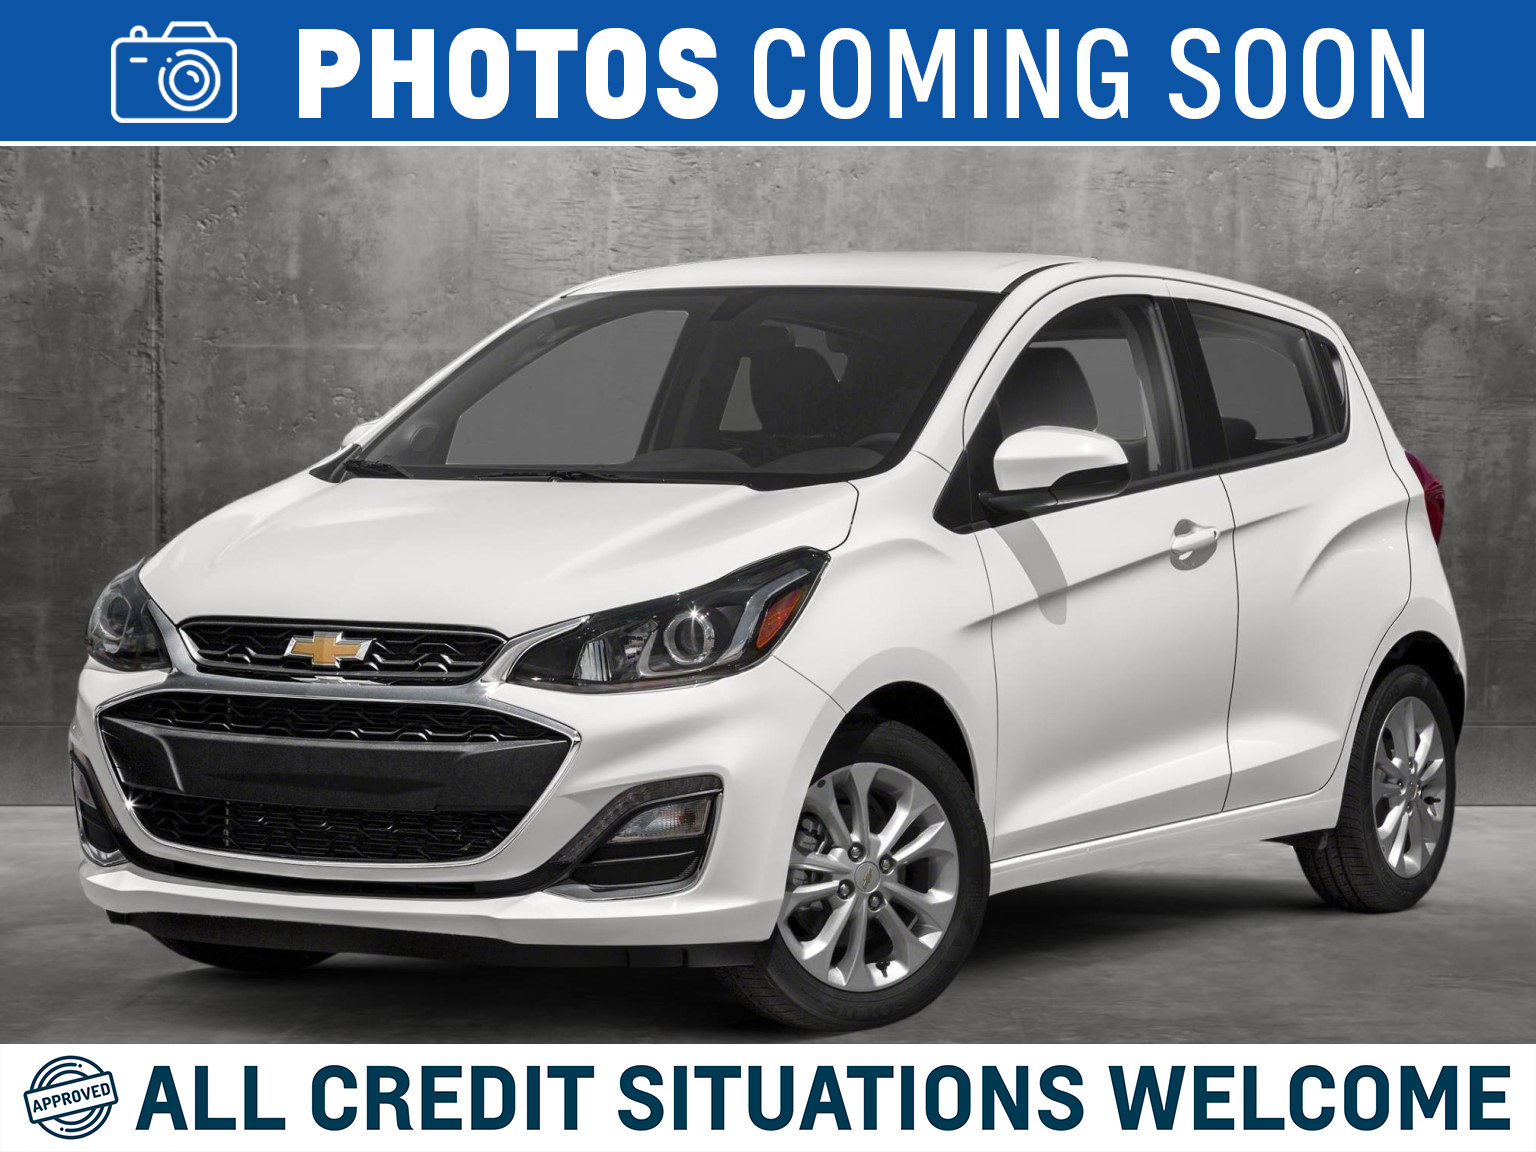 2019 Chevrolet Spark only 16,000kms like new